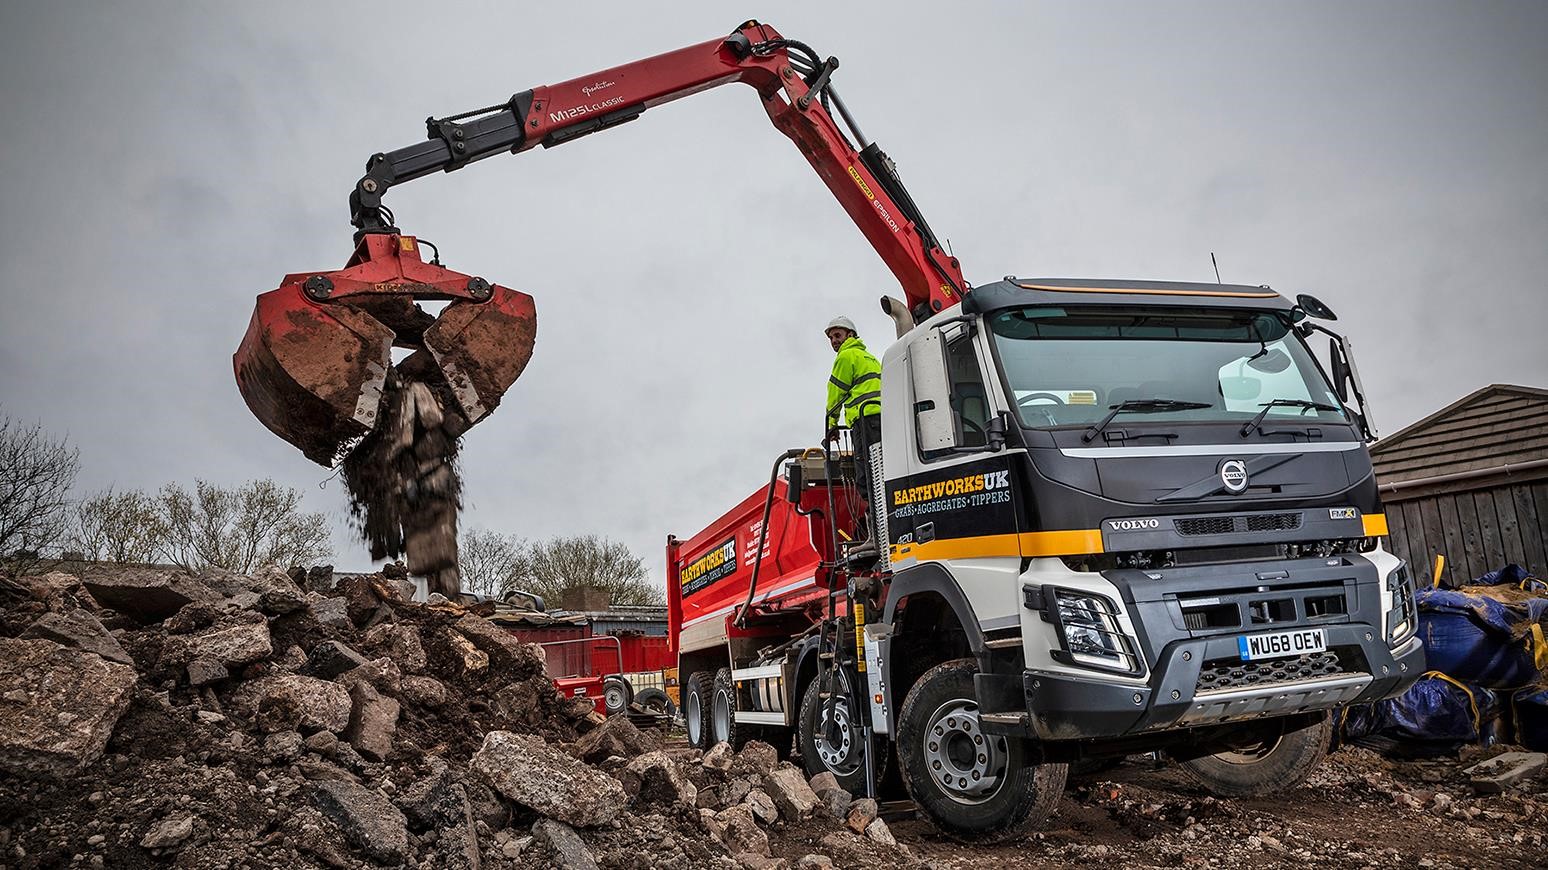 Bristol-Based Business Makes The Volvo FMX Its First New Truck Purchase